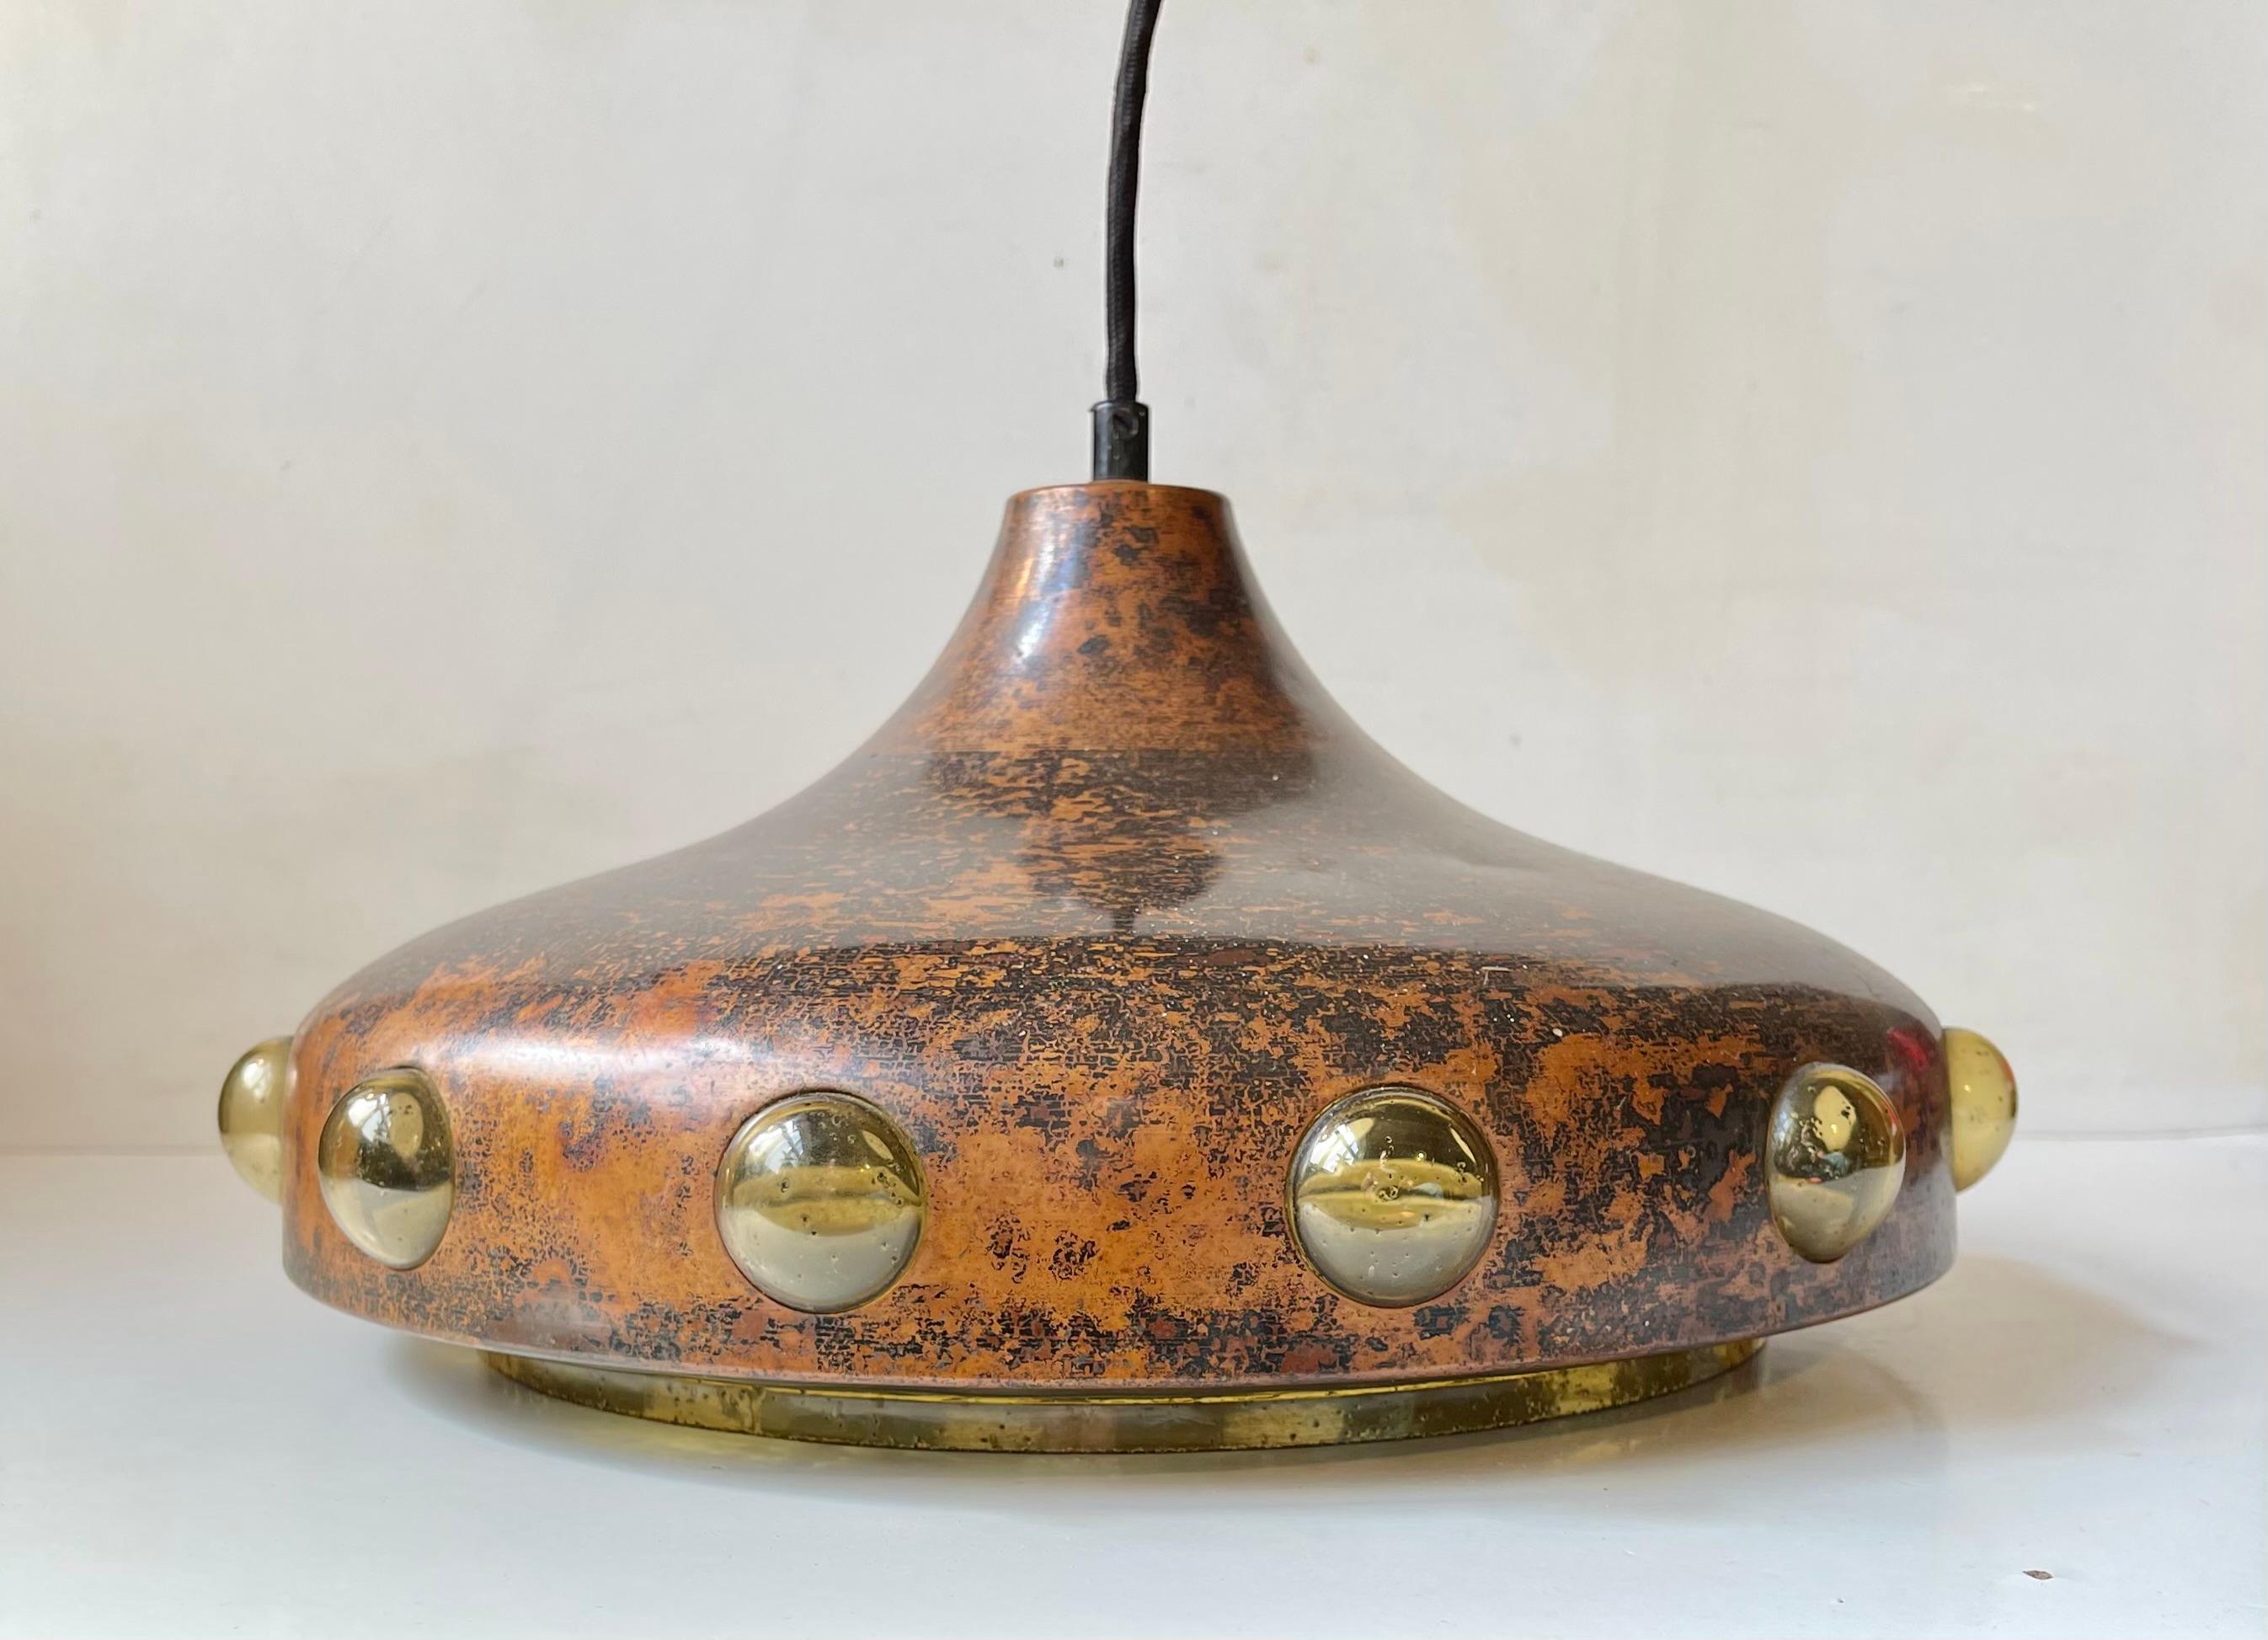 Acid-treated copper hanging pendant light with an interior textured amber glass shade with penetrating bubbles. It was designed by Finnish designer Nanny Still in the 1960s and manufactured by Raak Amsterdam. Measurements: H: 25 cm, Diameter: 32 cm.